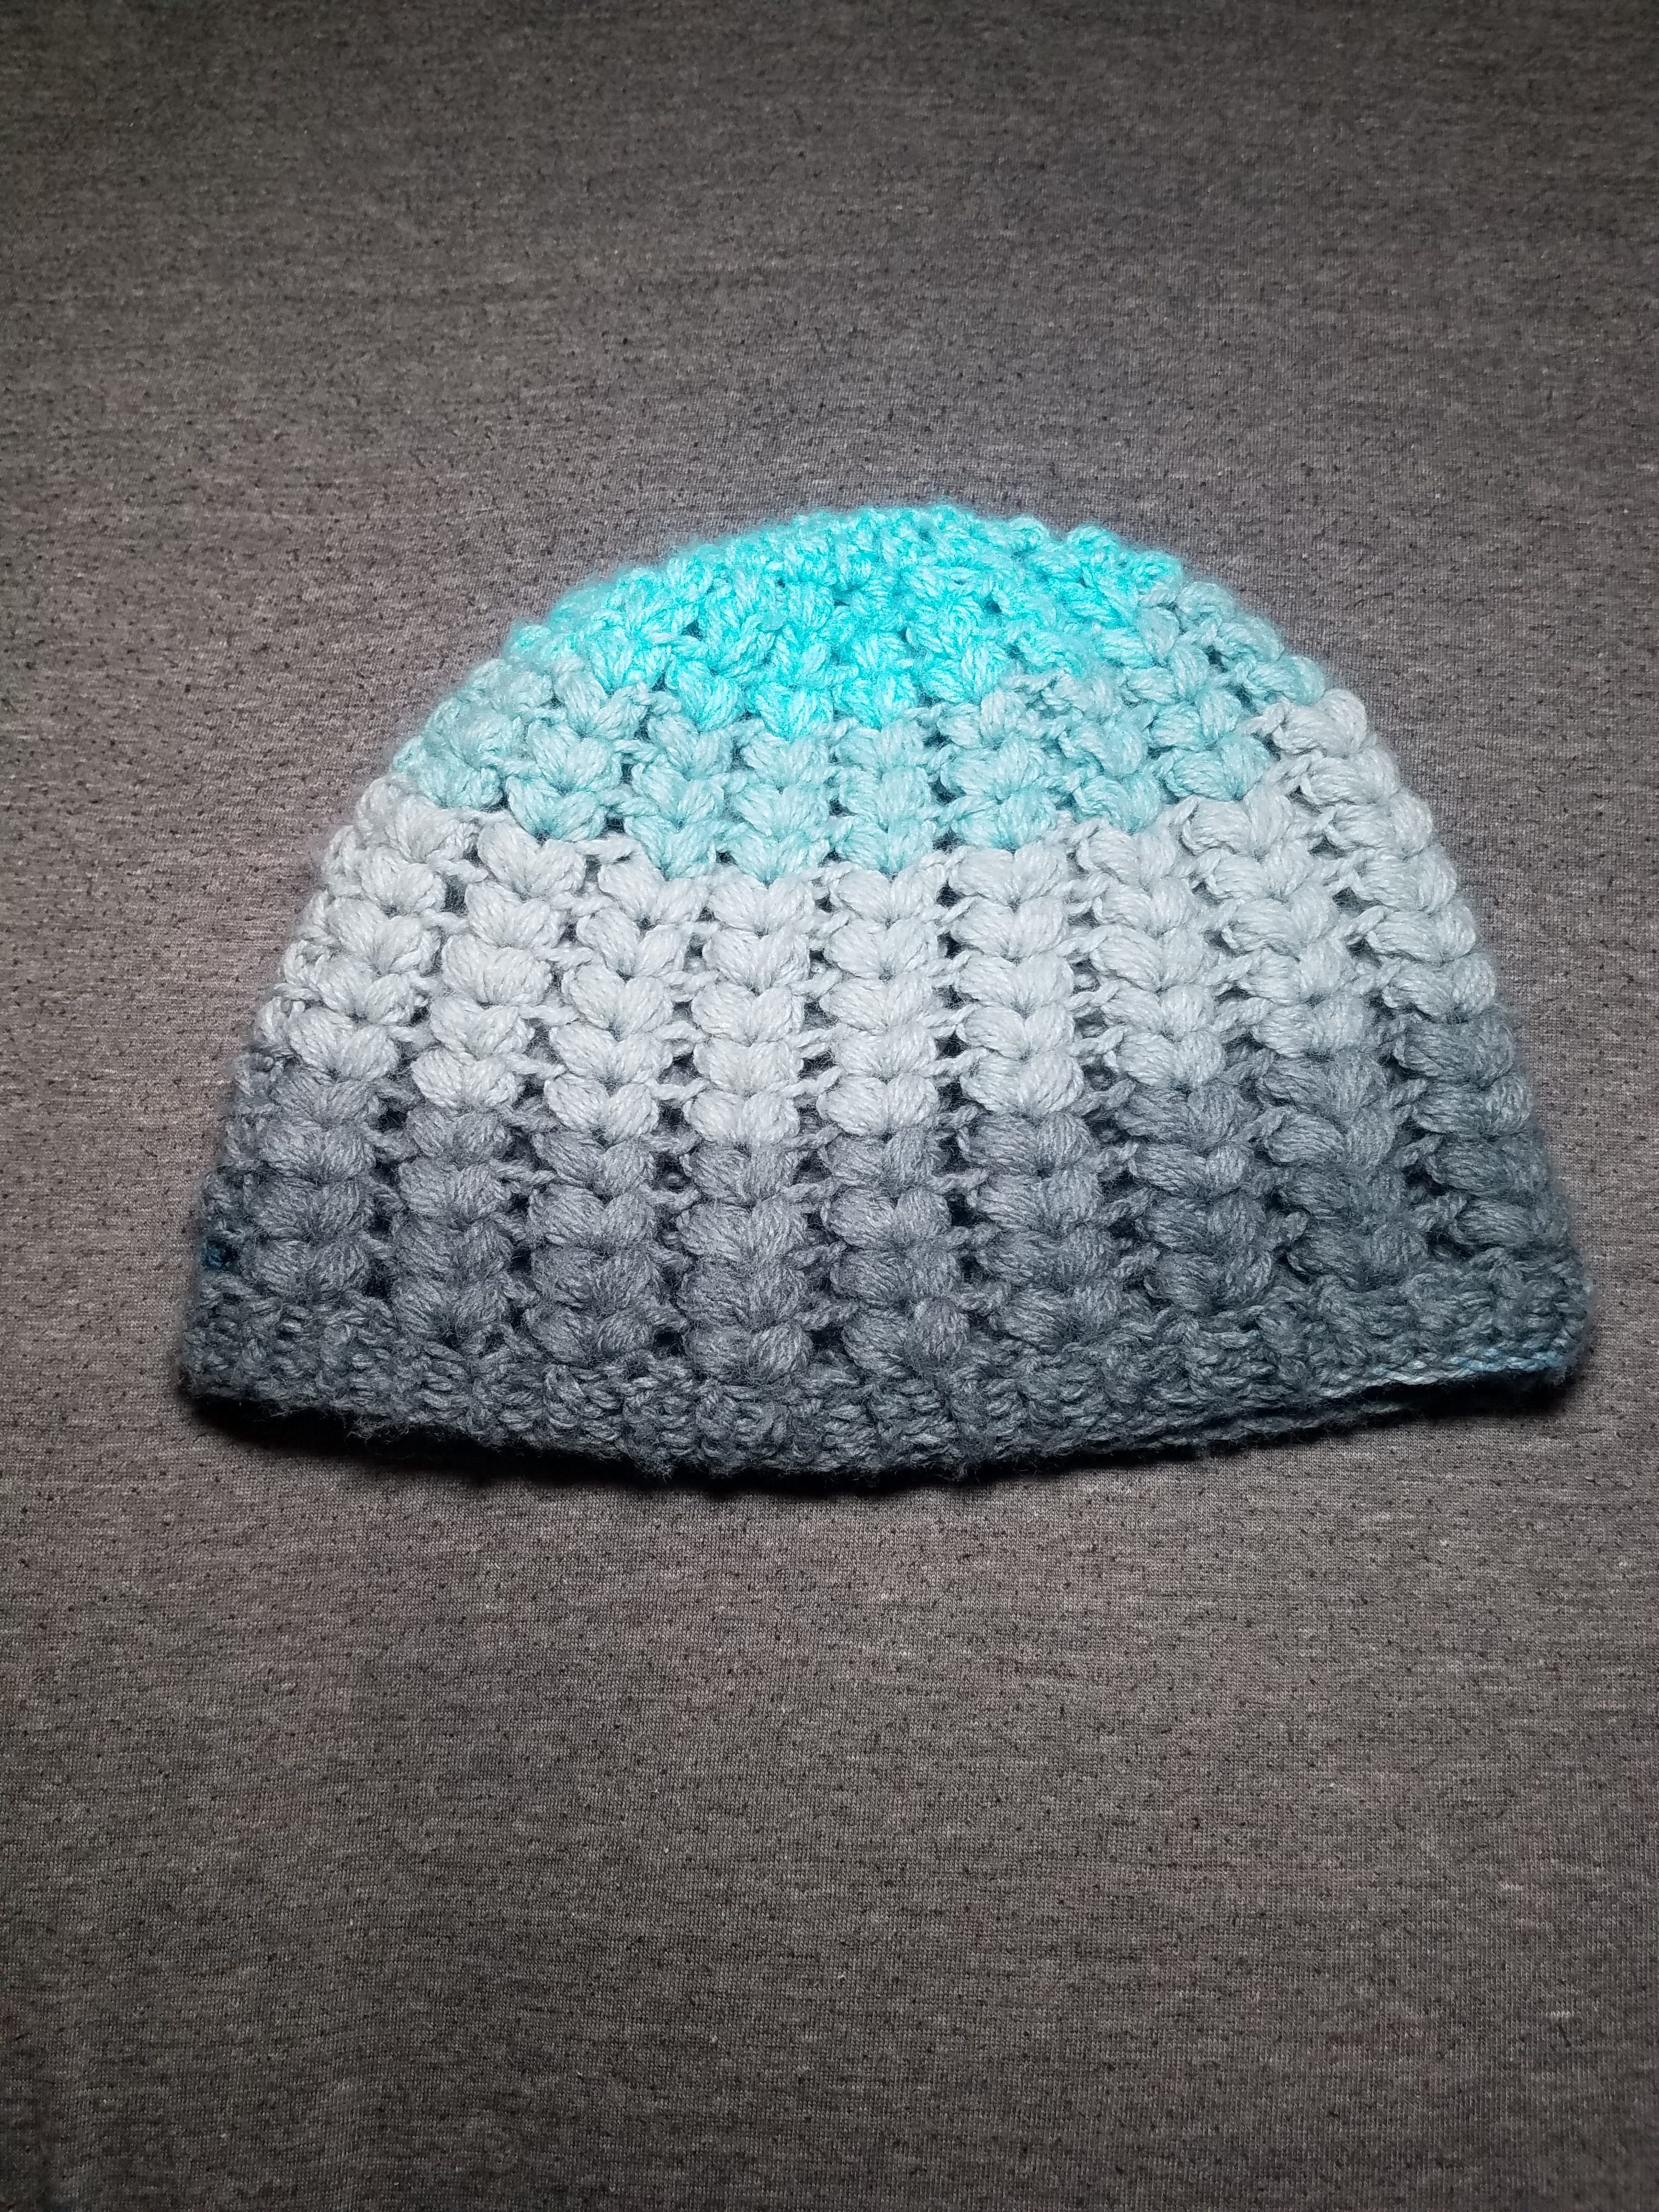 65+ Free Crochet Hat and Beanie Patterns - Dabbles & Babbles